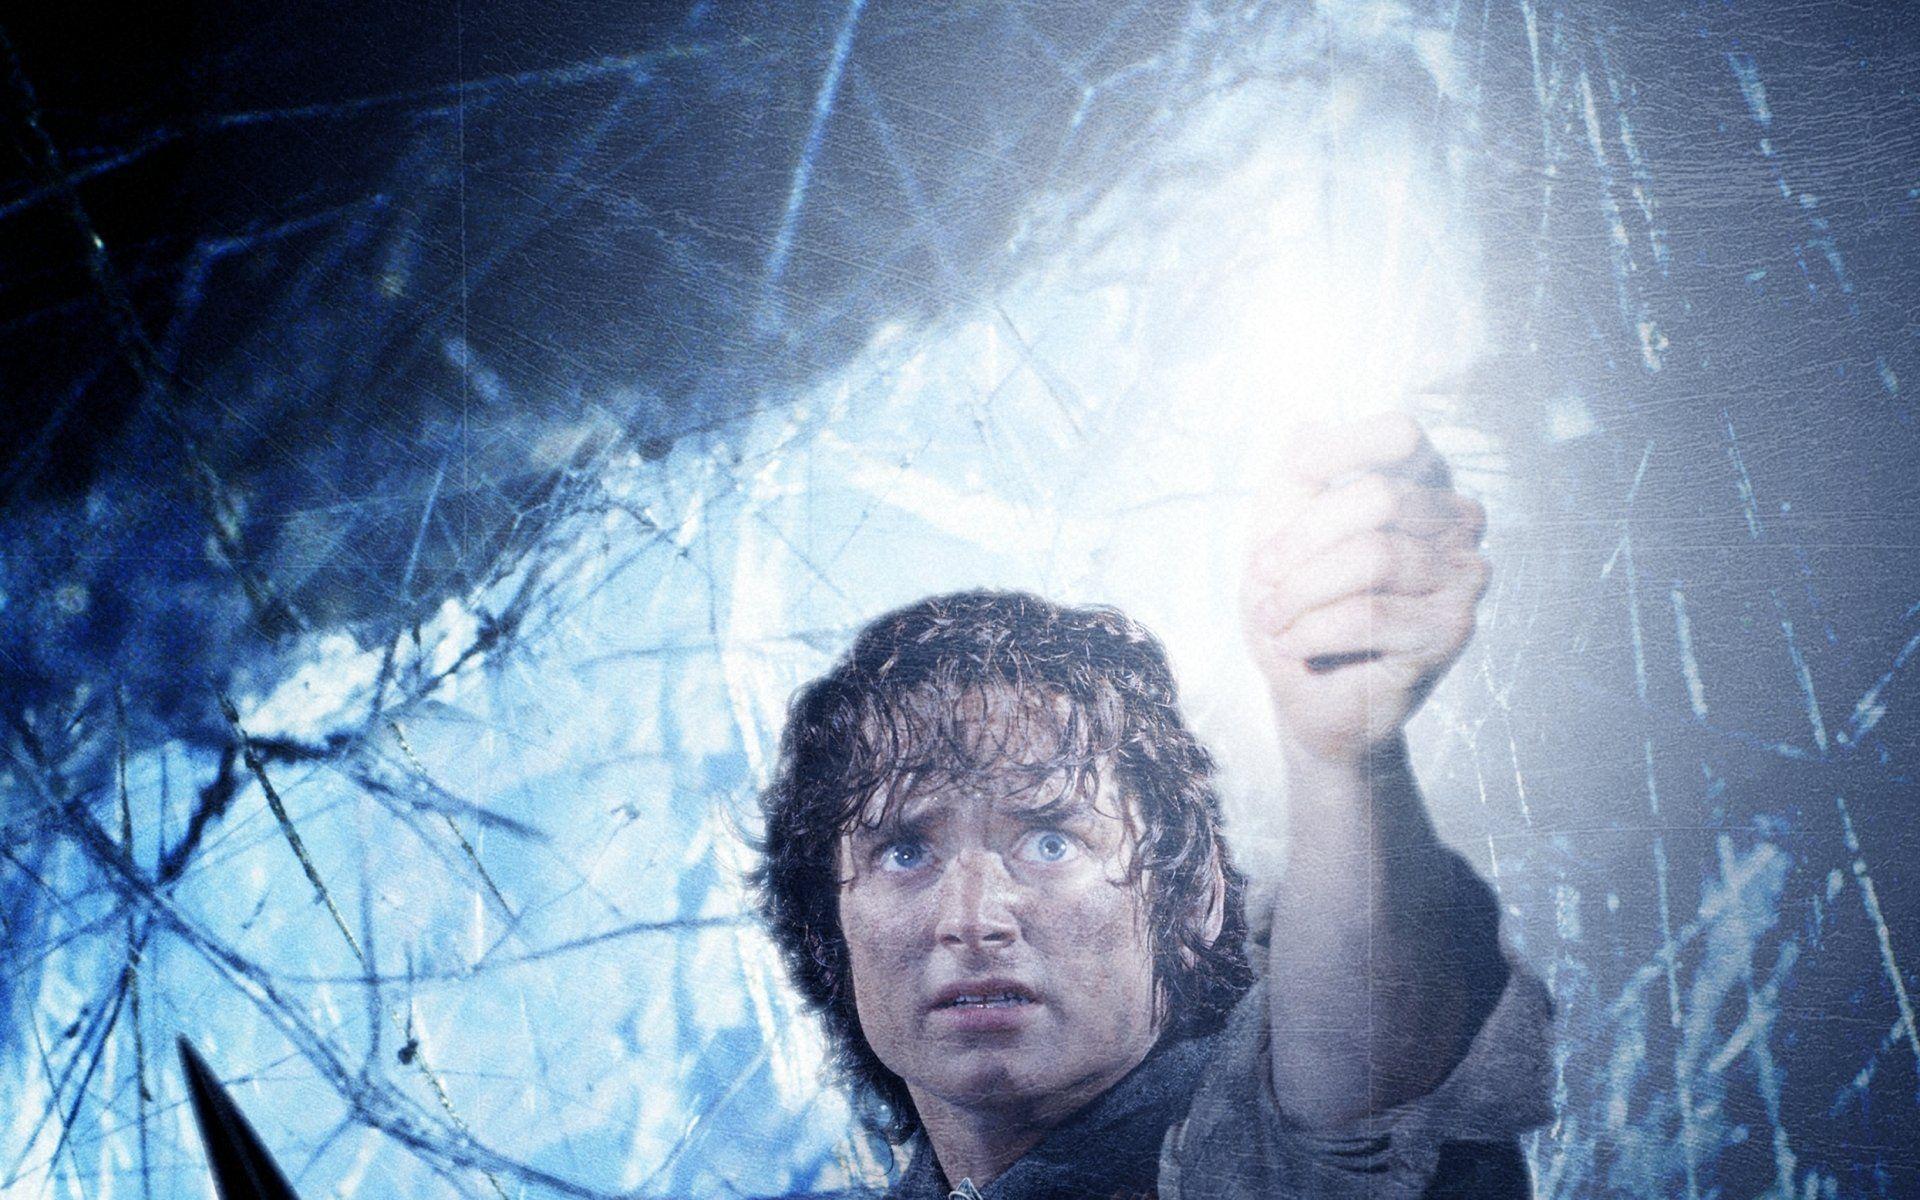 the lord of the rings wallpaper frodo